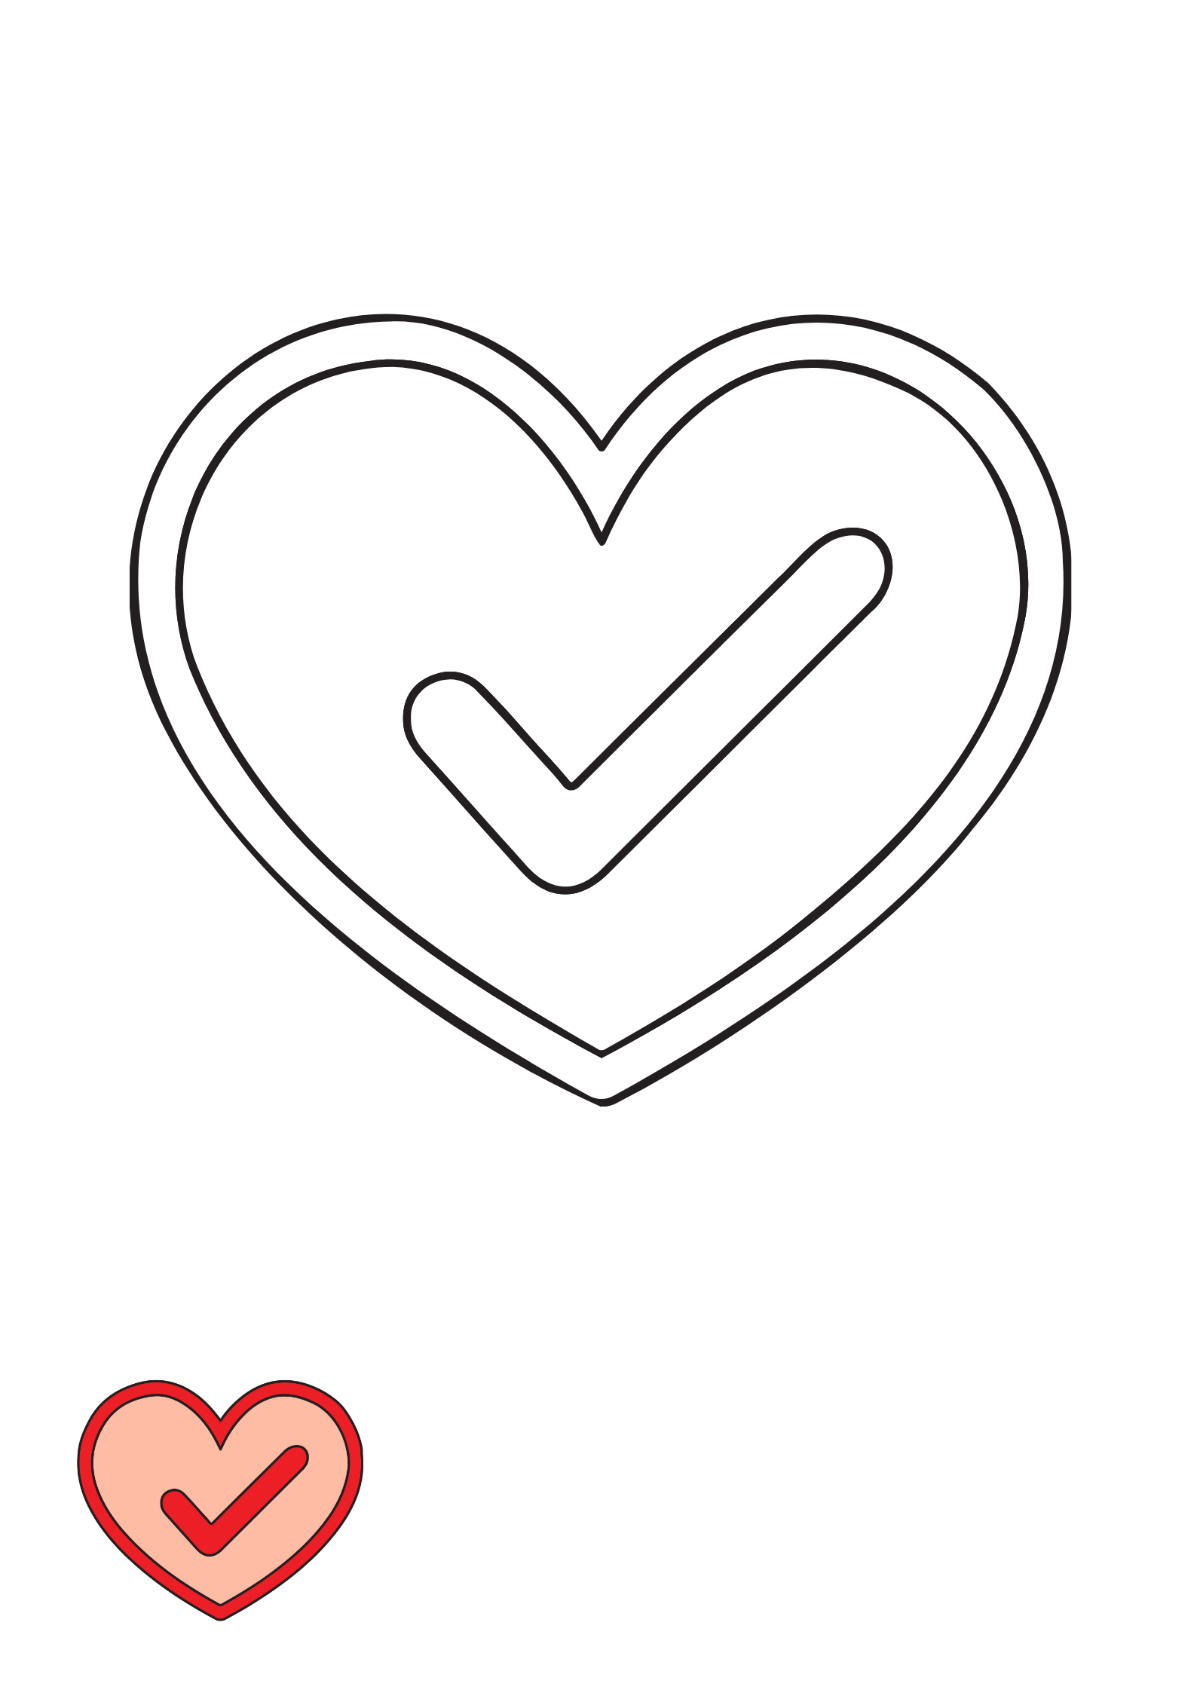 Heart Check Mark coloring page Template